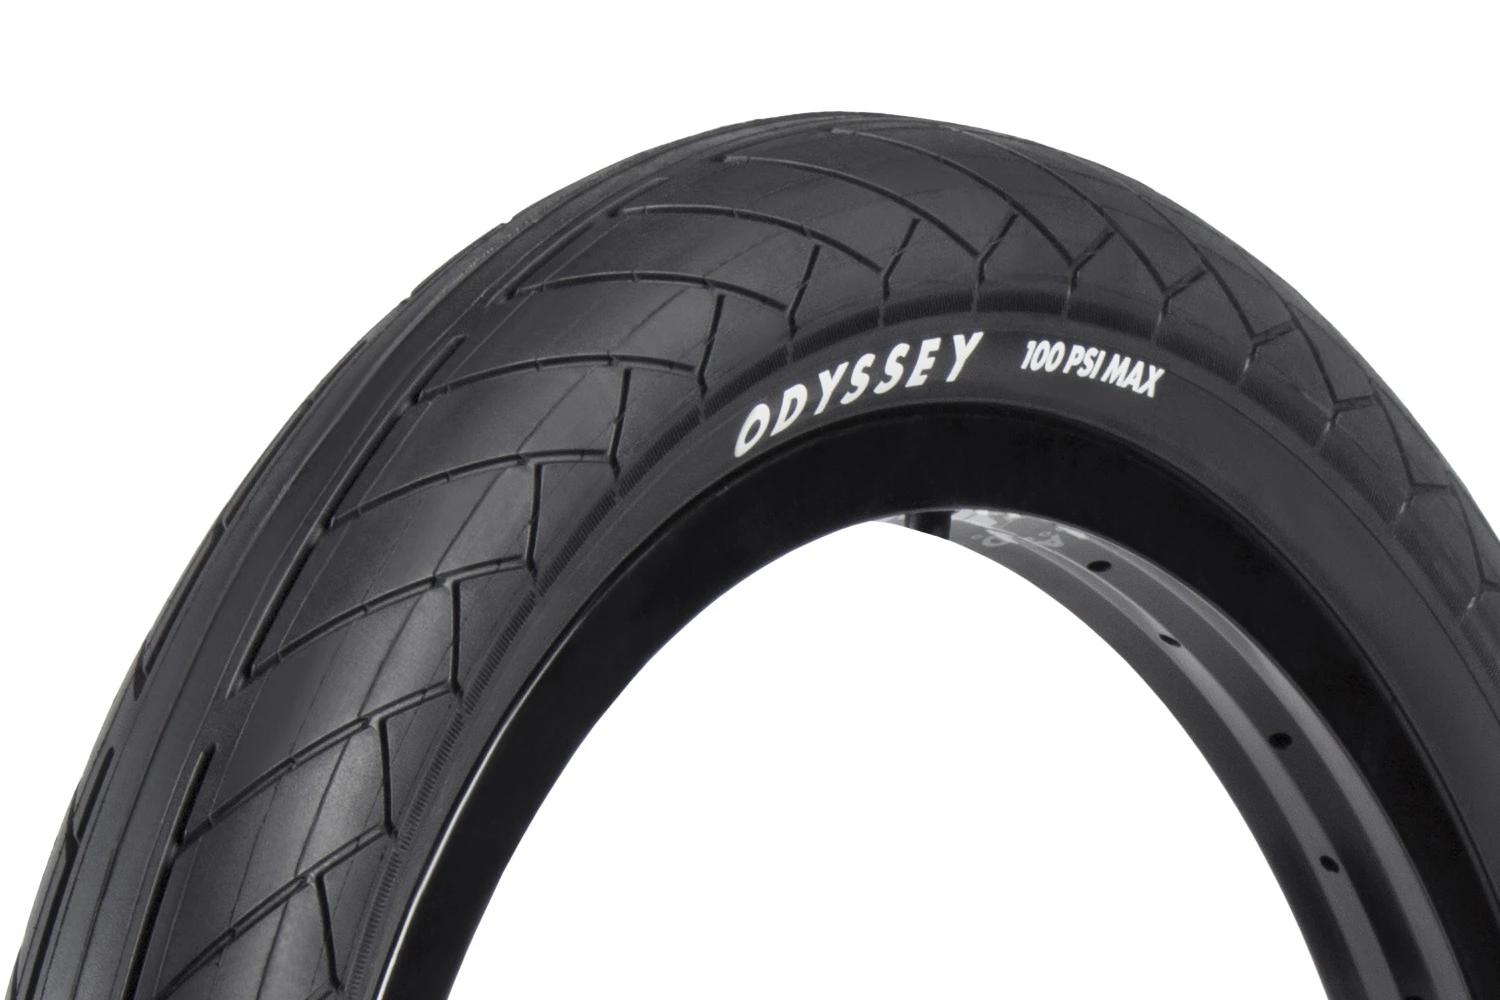 Side view of the Odyssey DGN tire in black